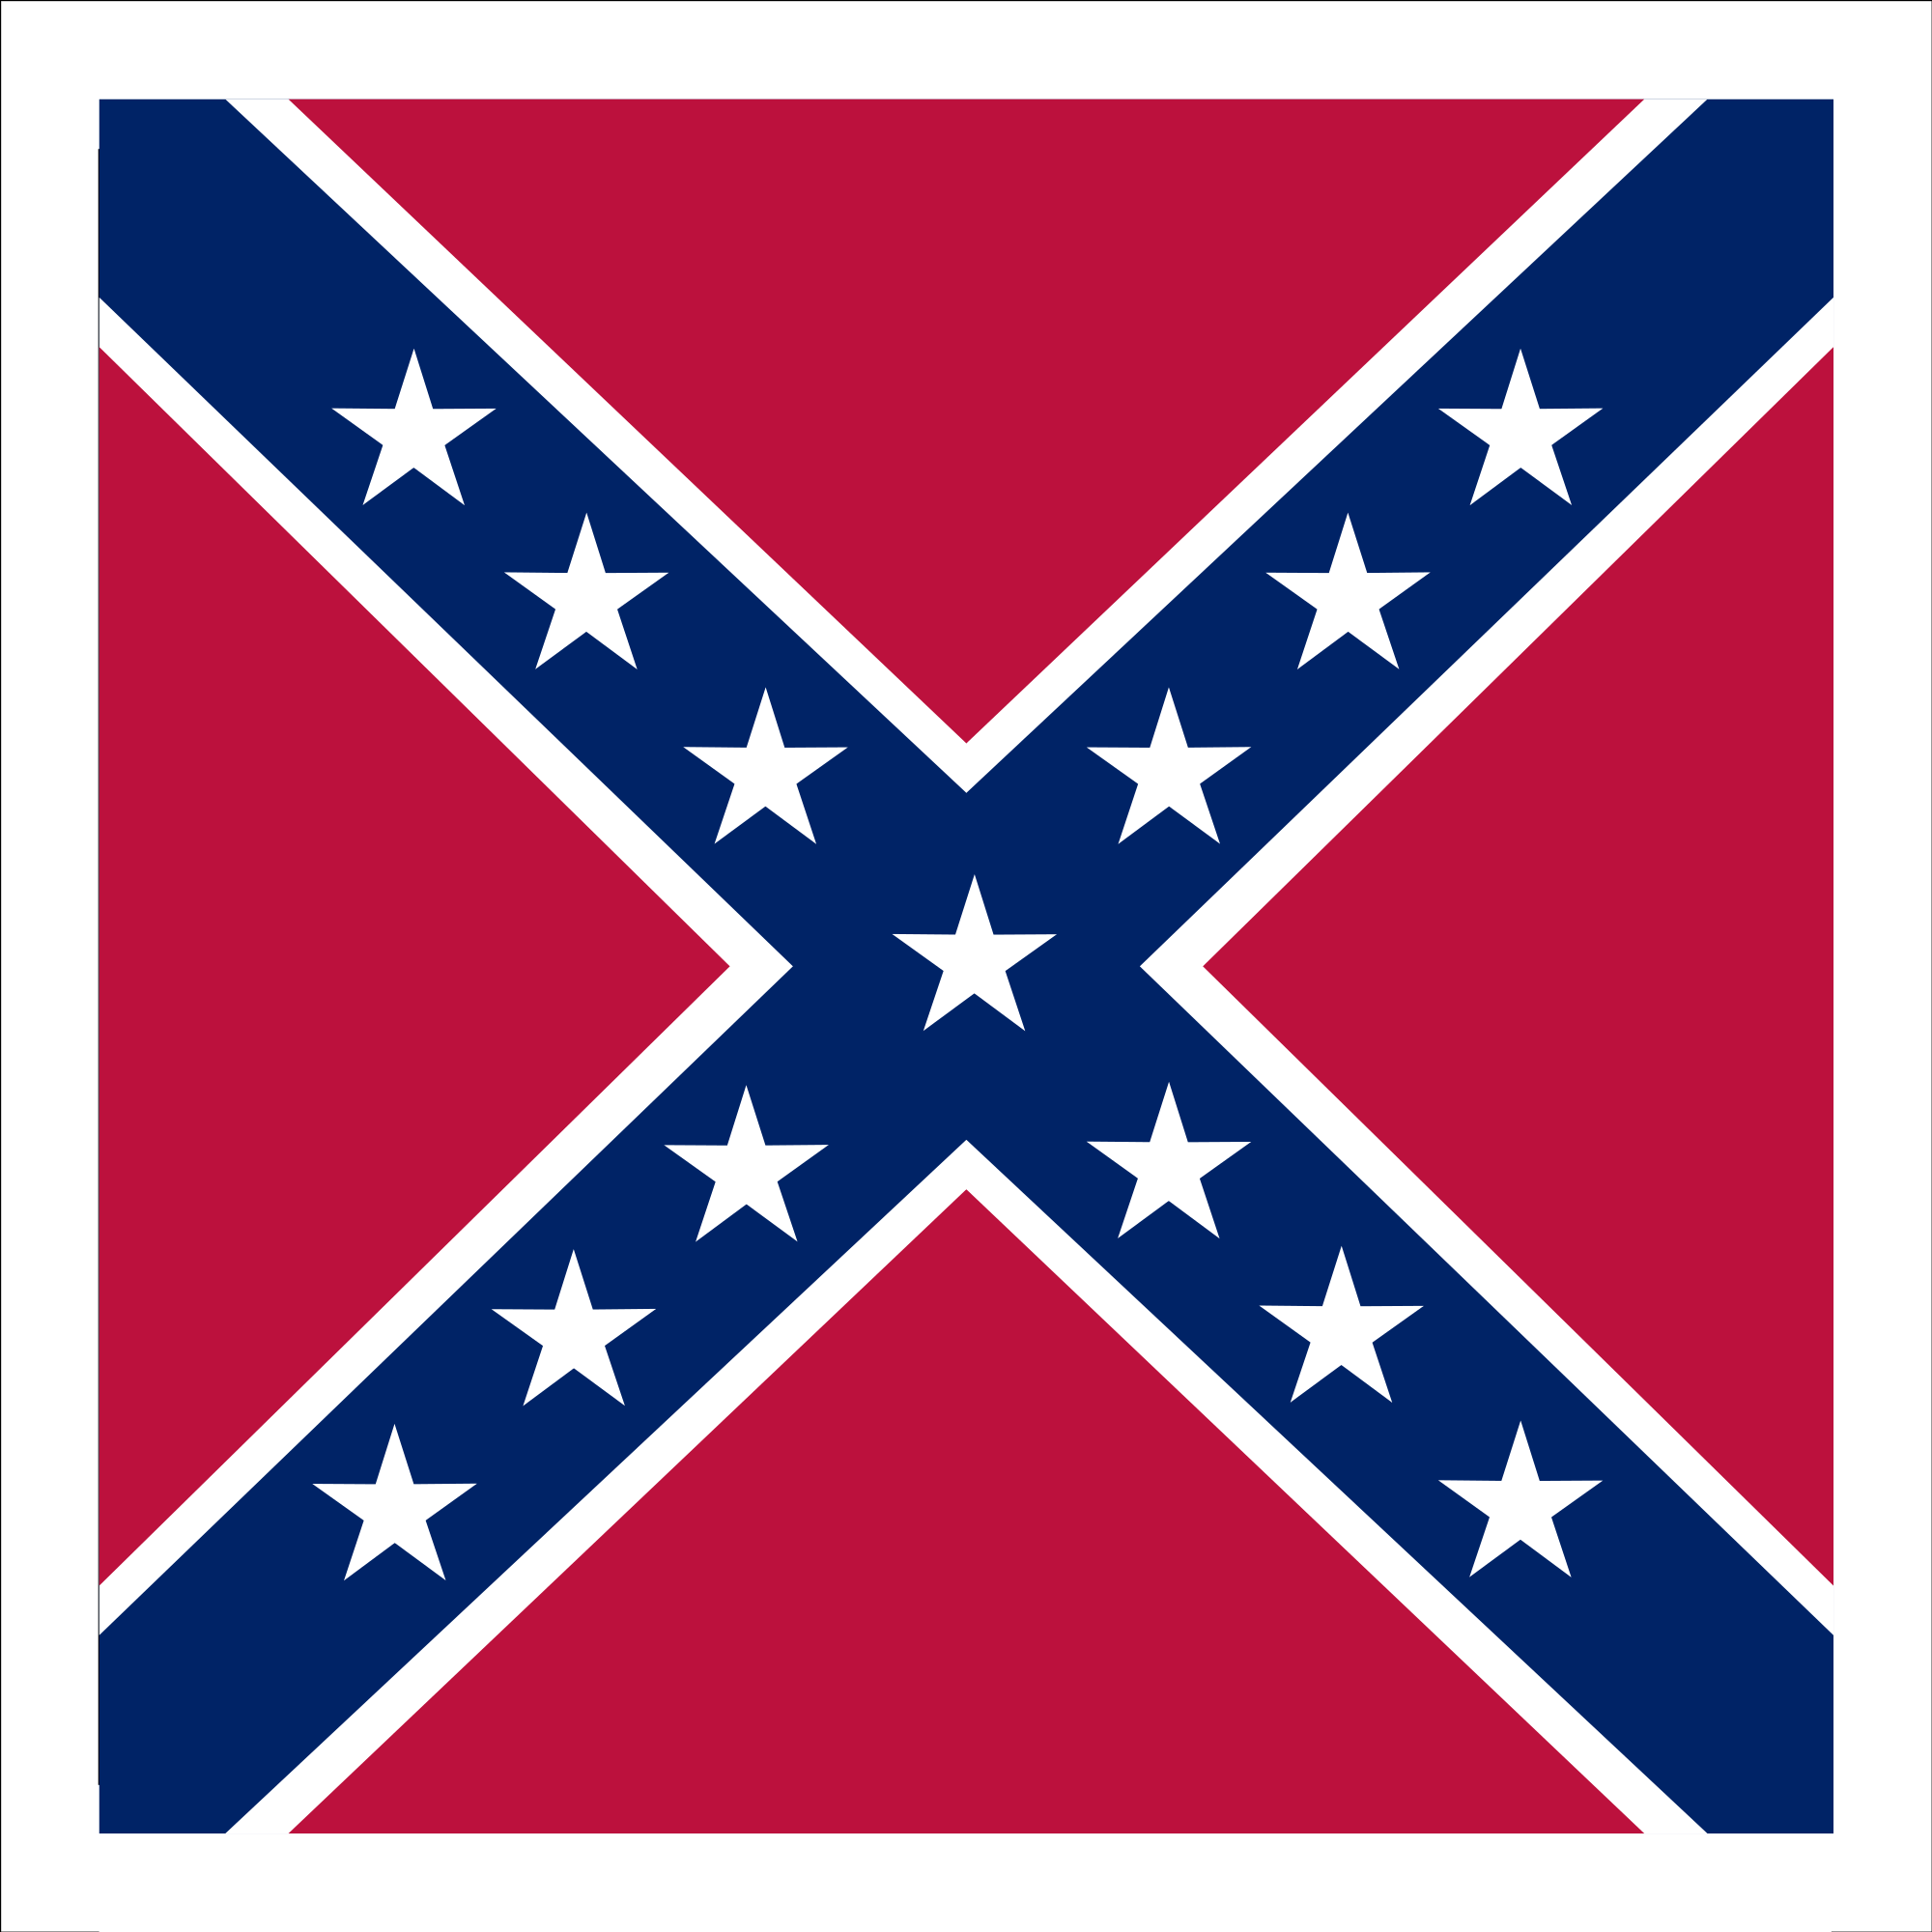 Confederate Flags Products Made in USA